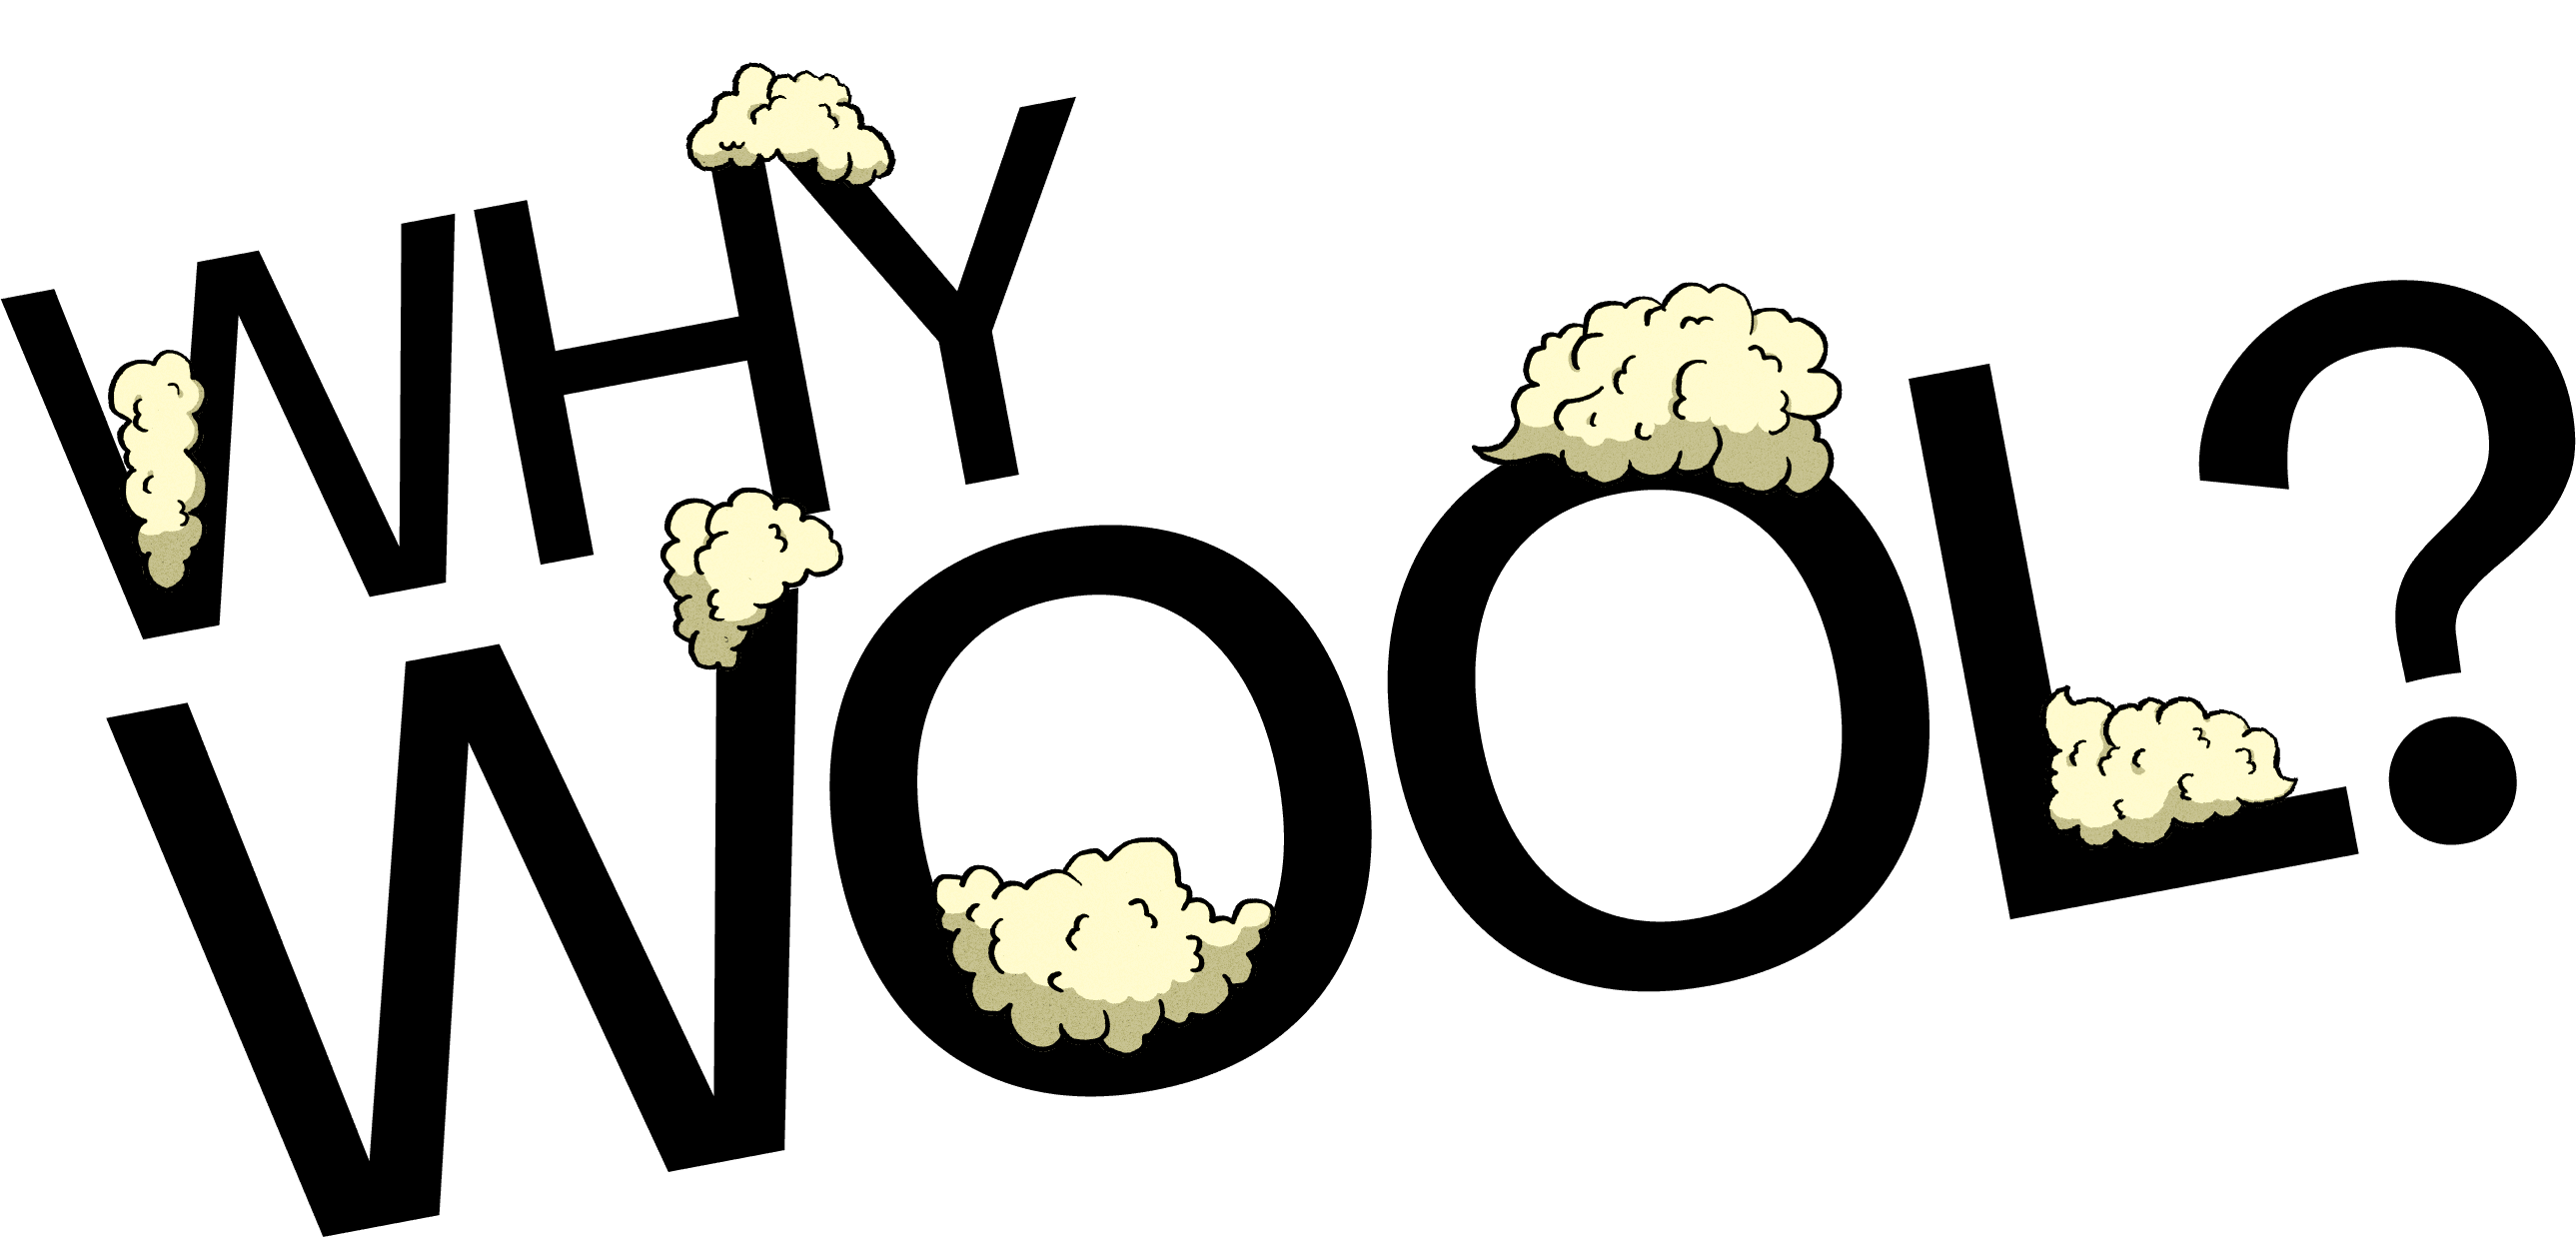 WHY WOOL?